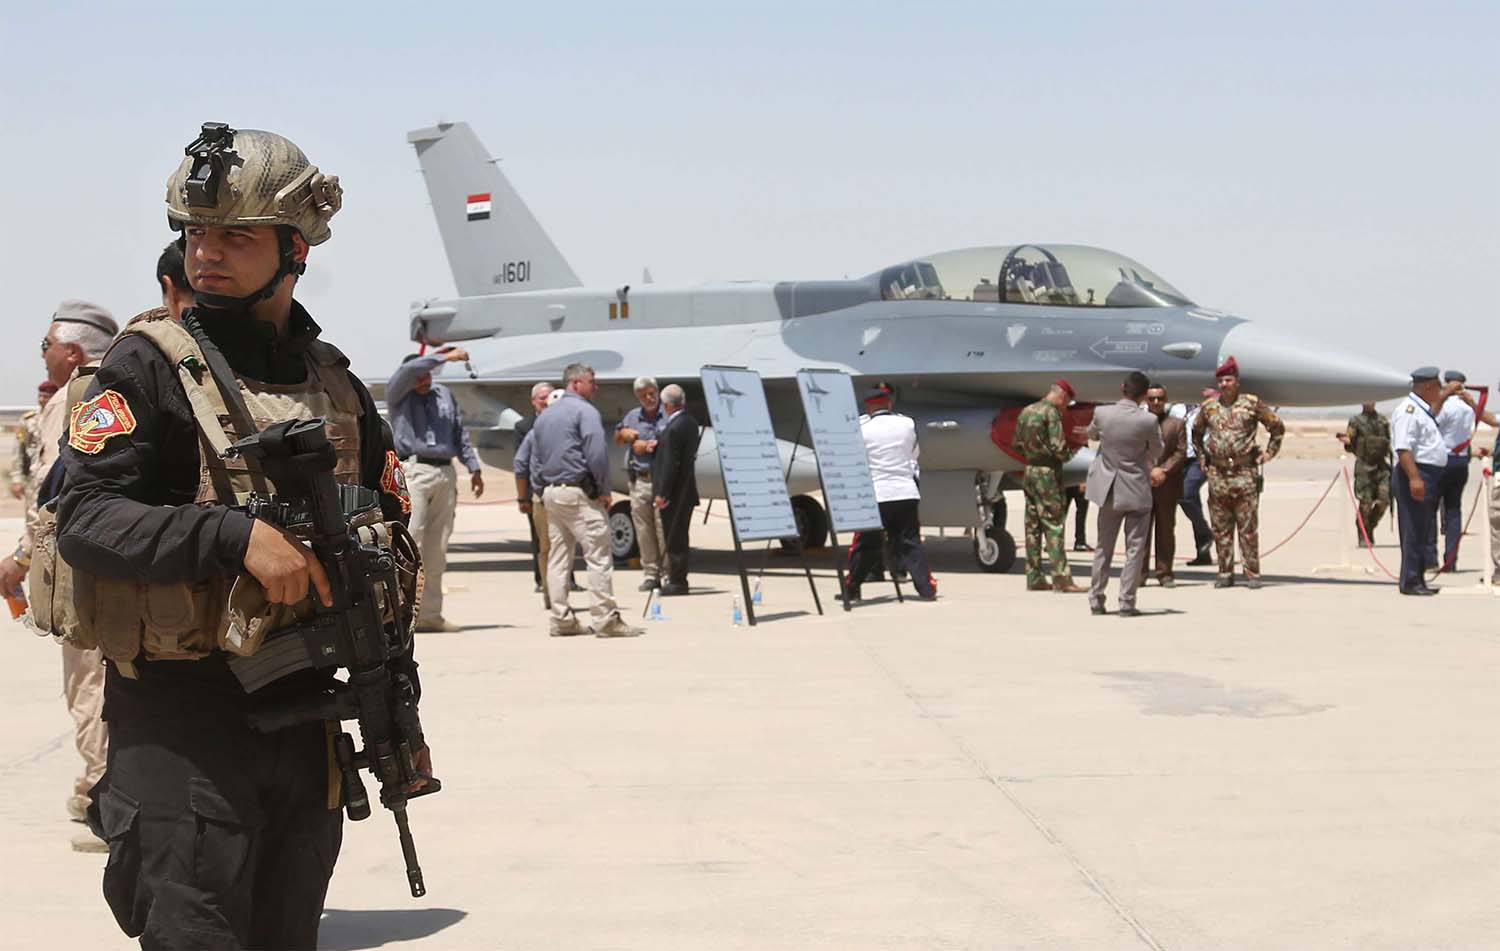 The last time the Balad air base was struck was April 18